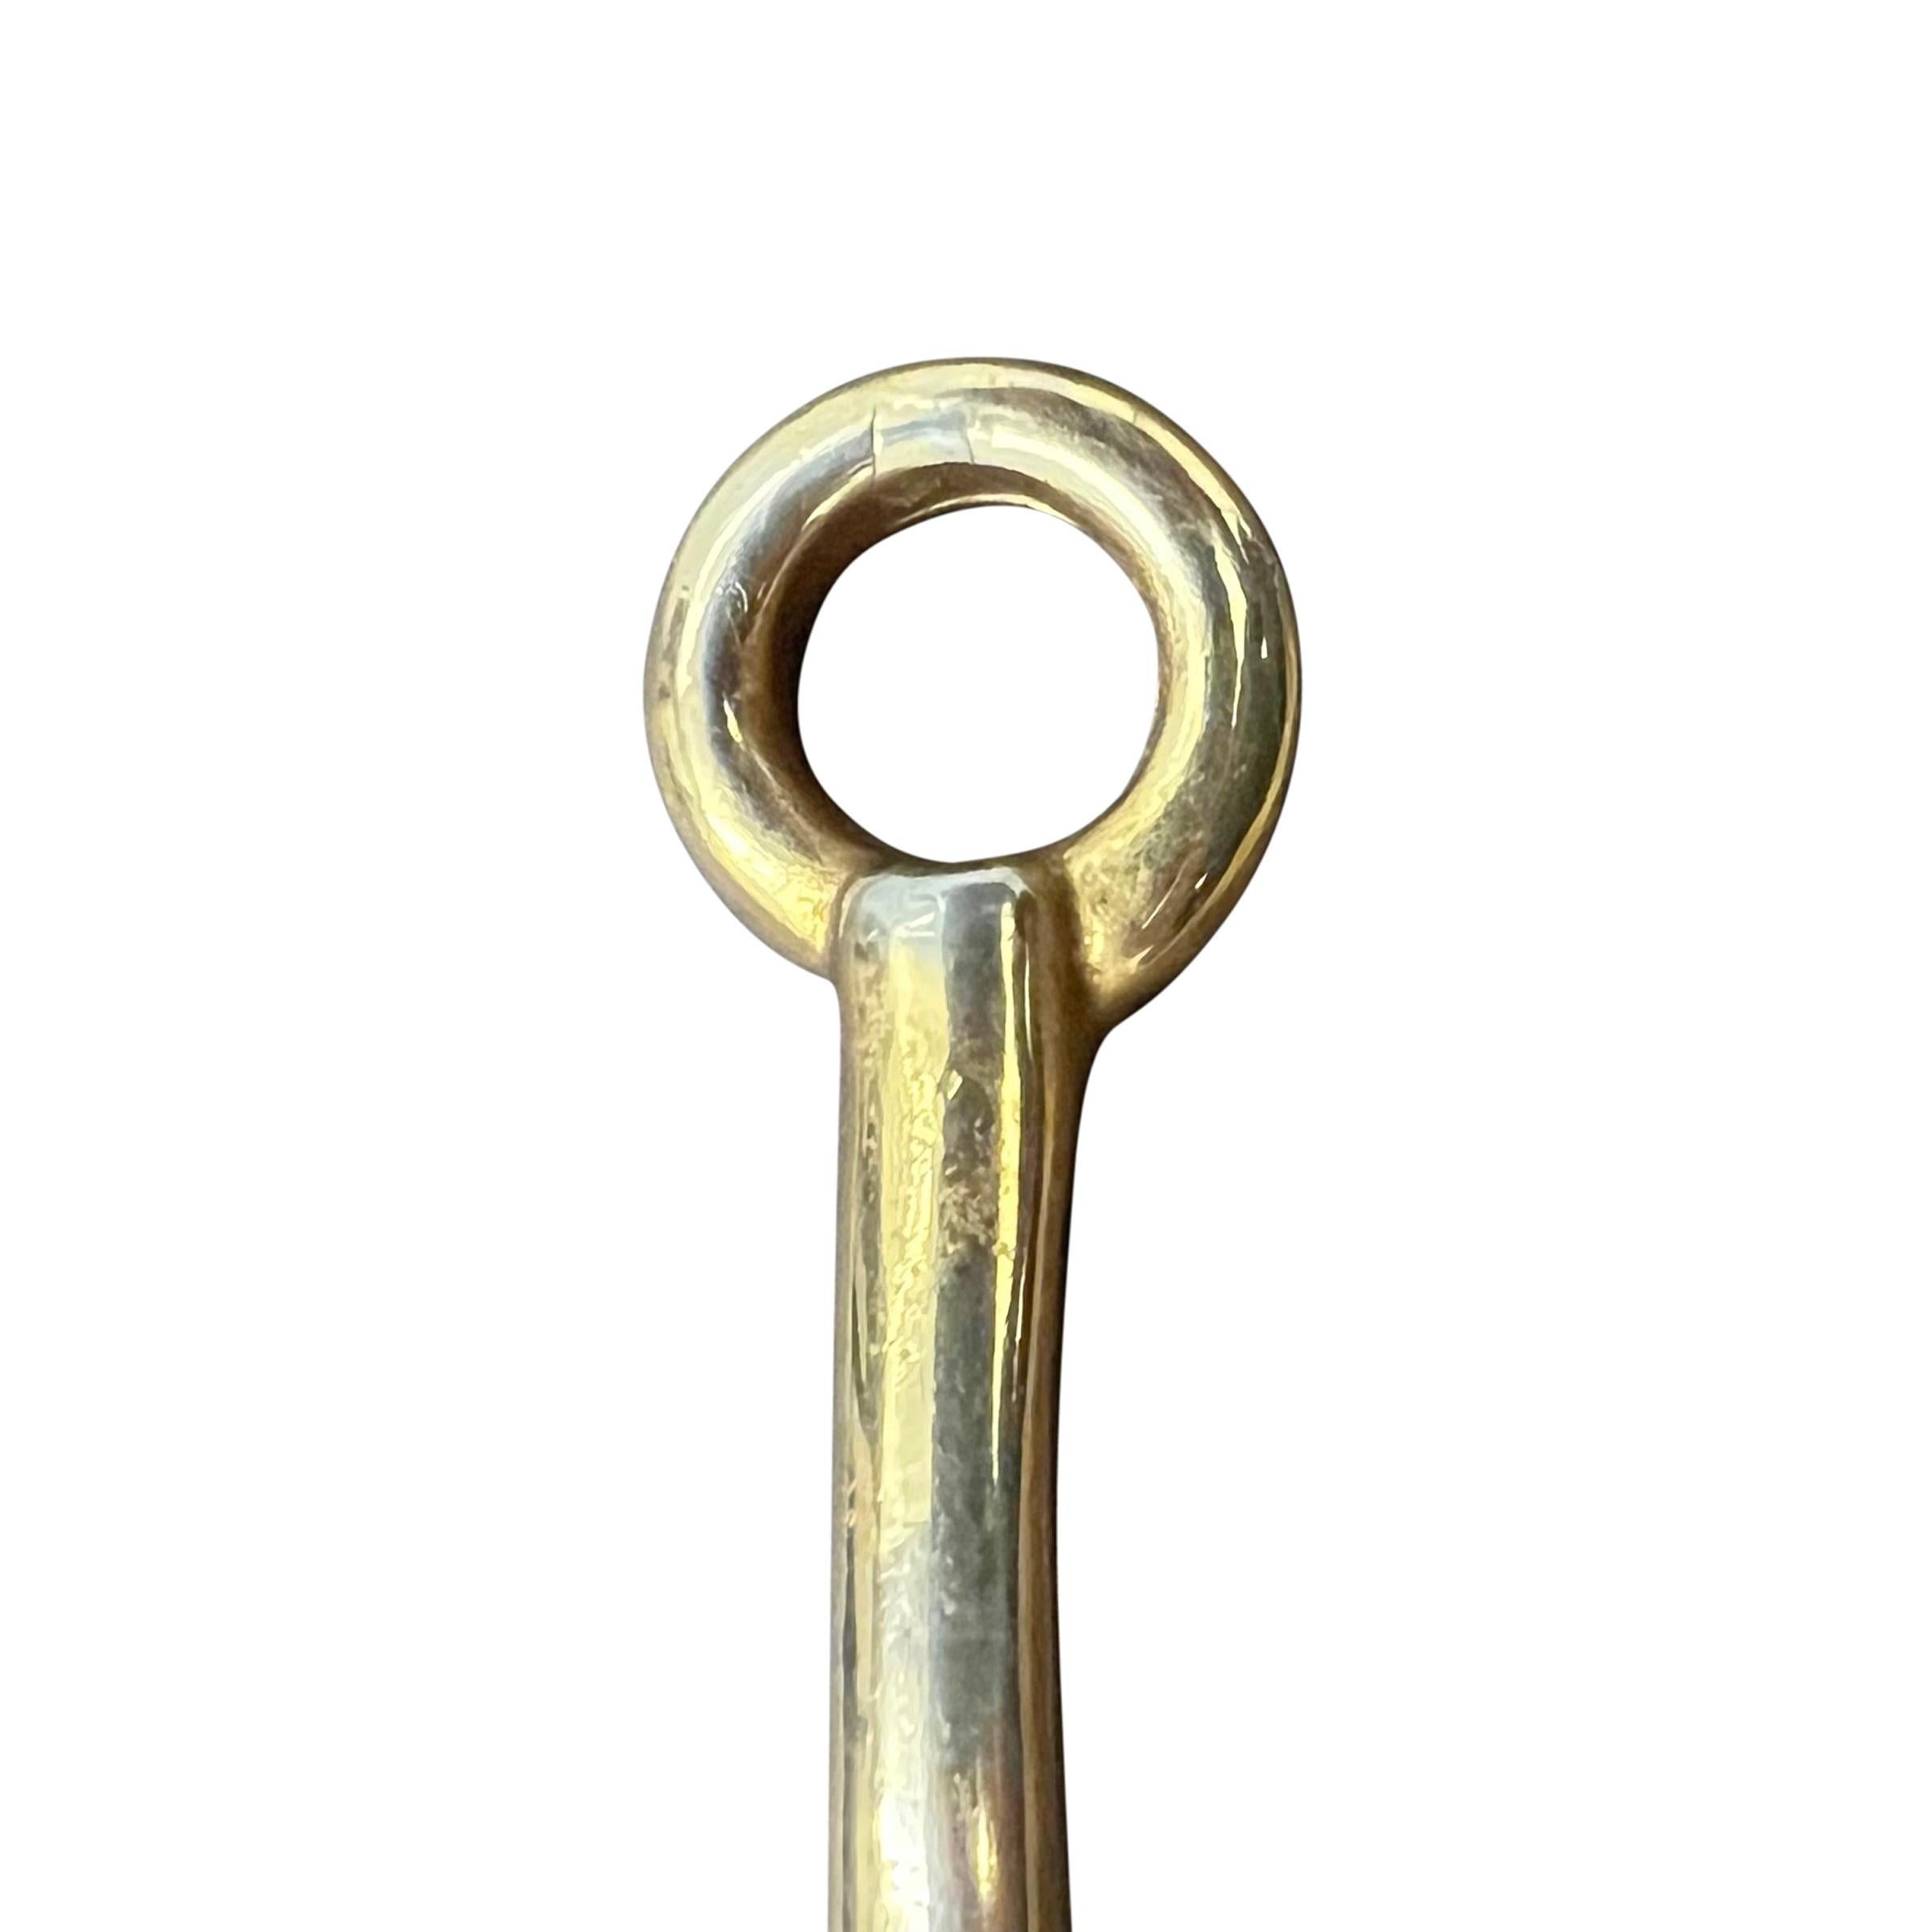 Late 20th Century Vintage Gucci Gold-Plated Horsebit Bottle Opener